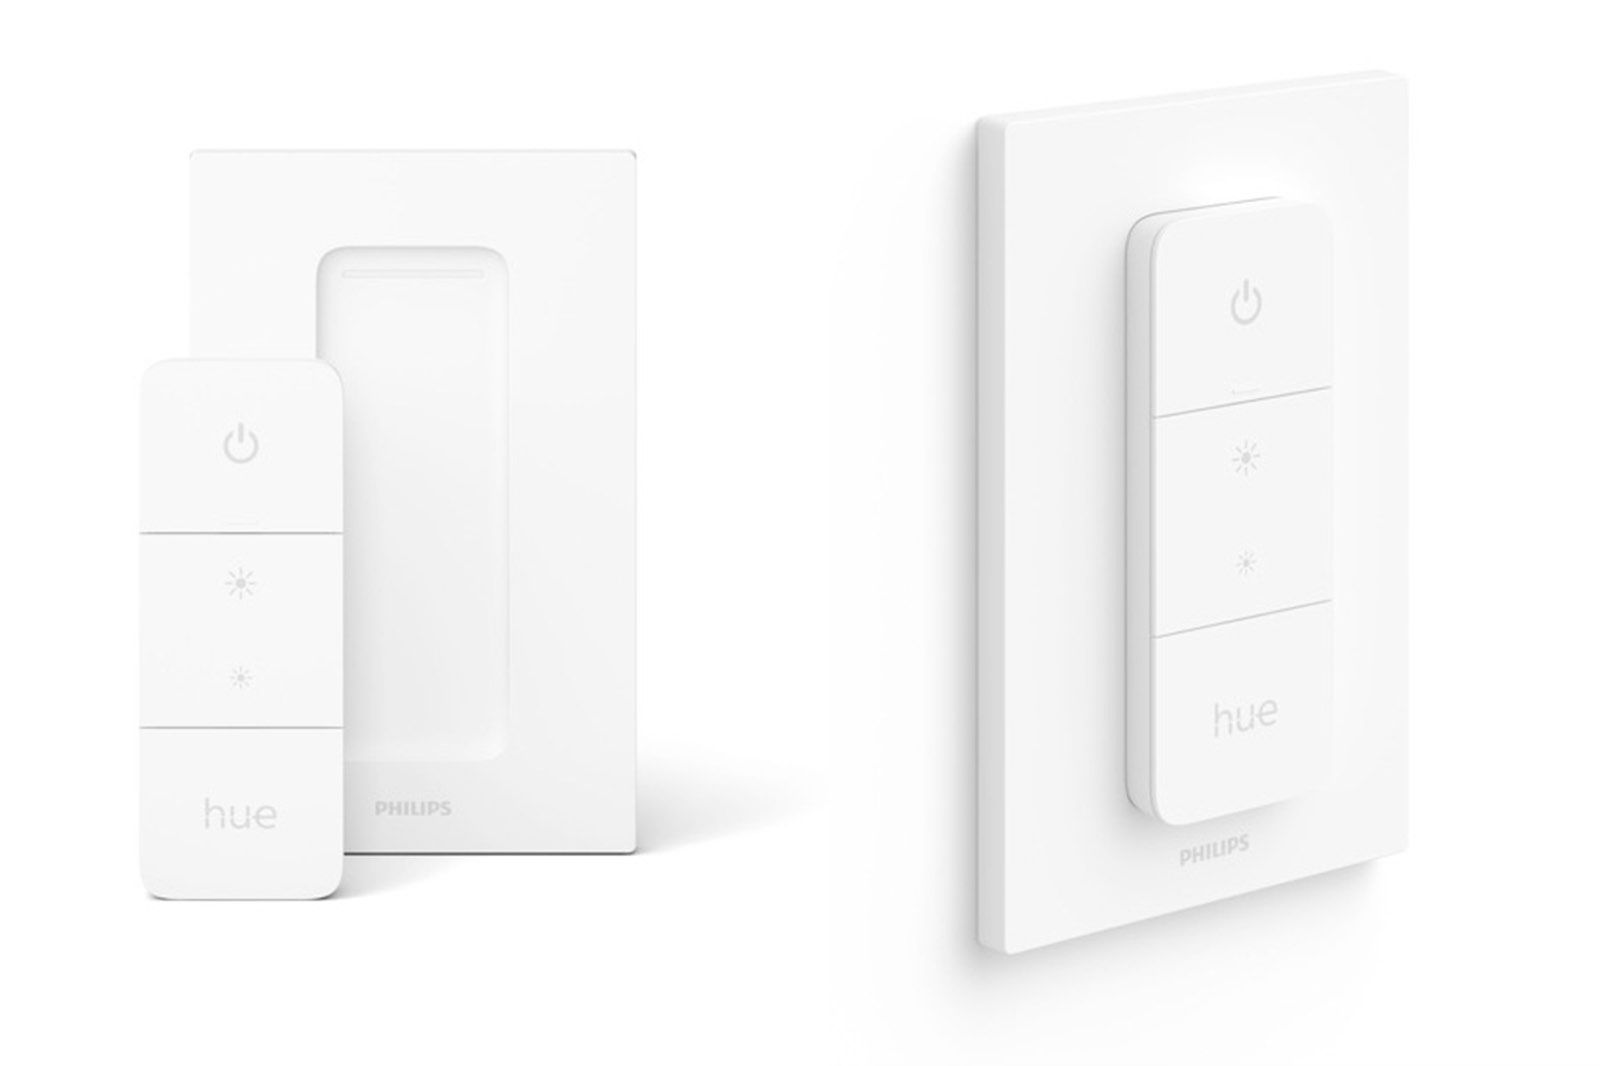 Redesigned Philips Hue dimmer switch photo 1